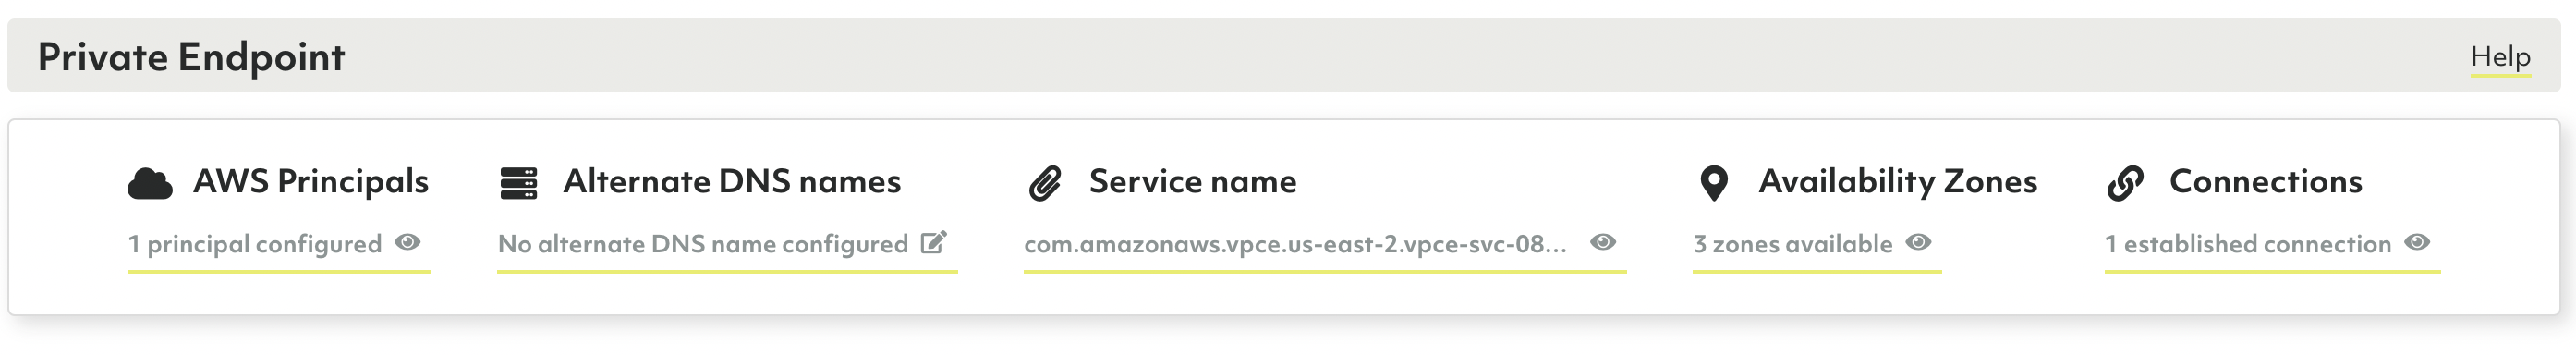 ArangoGraph AWS Private Endpoint Overview